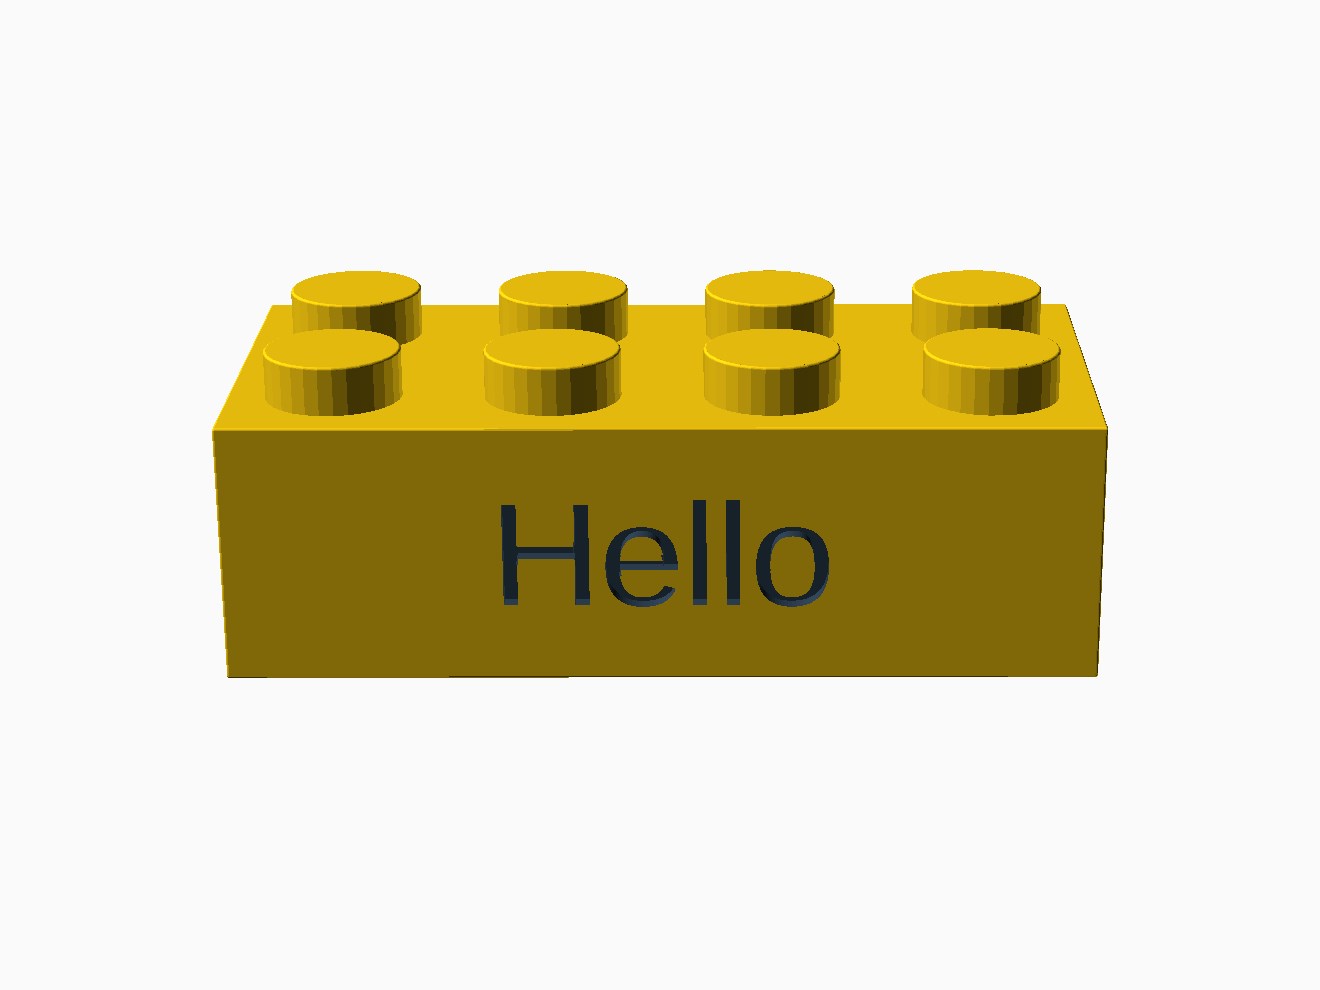 3D printable model of a LEGO 4x2 brick with engraved text.